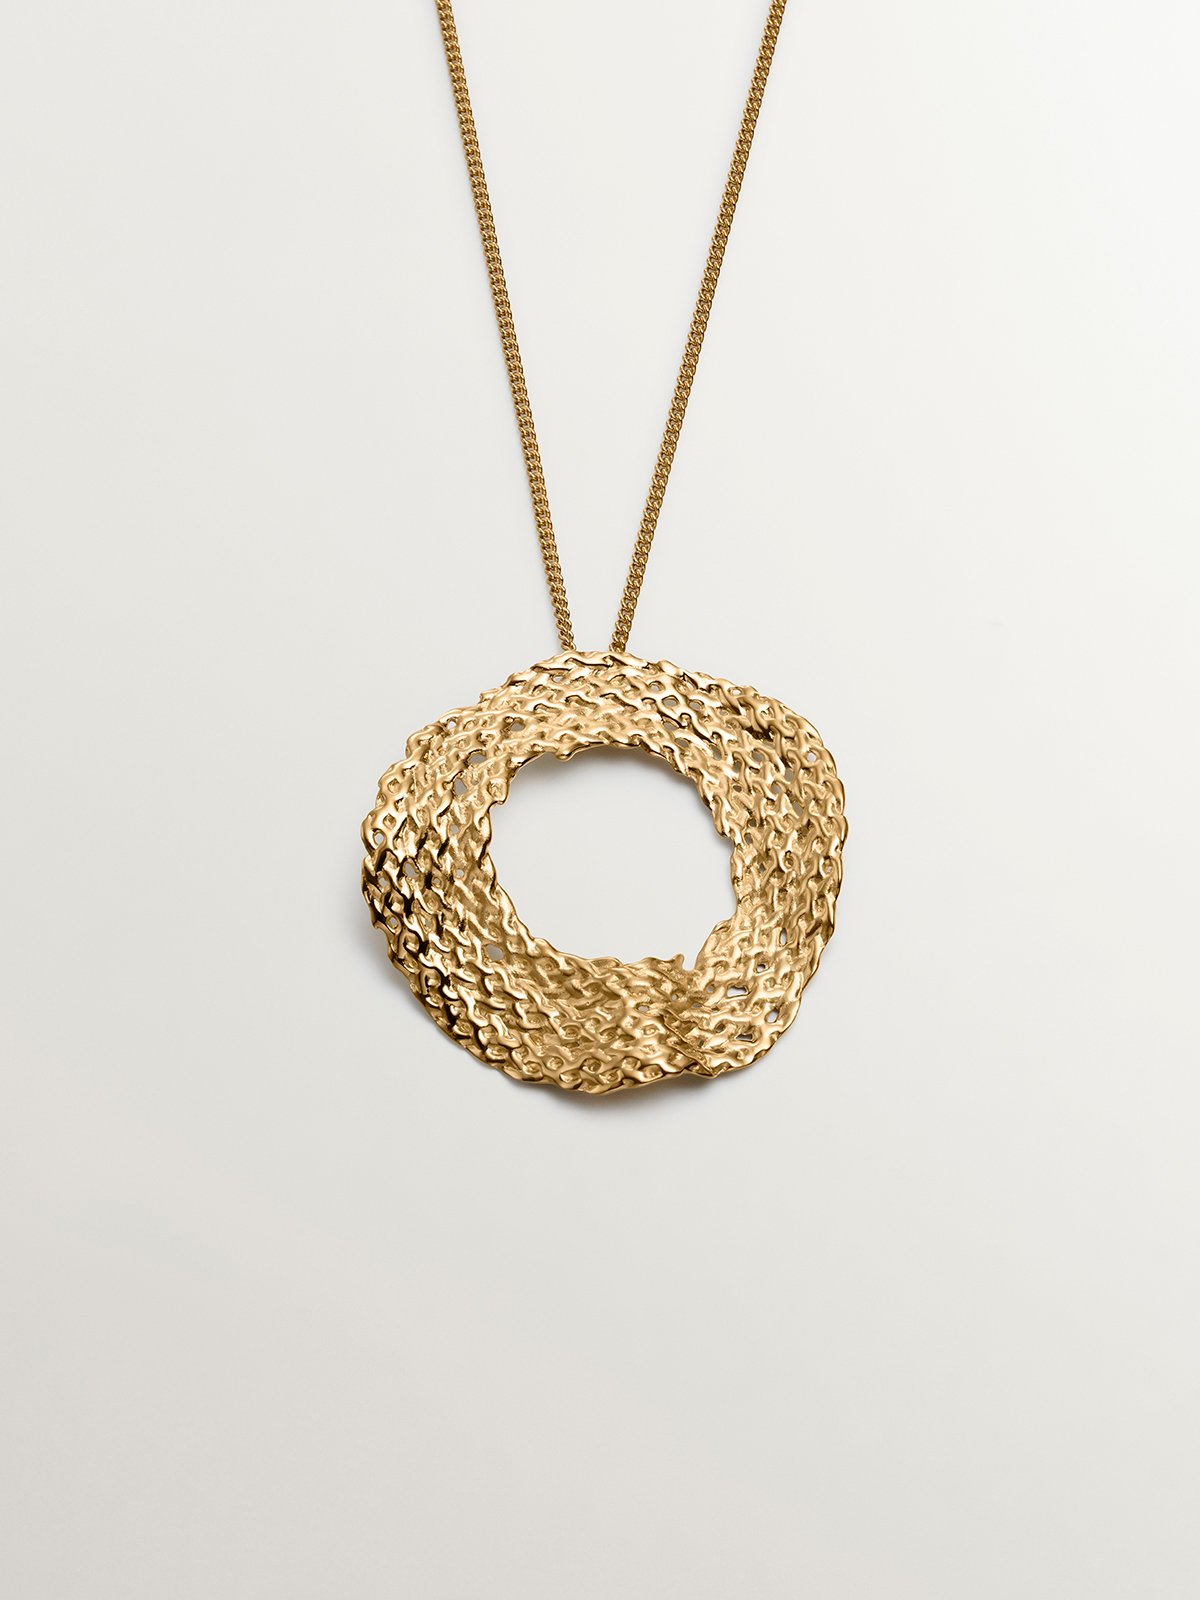 925 Silver pendant bathed in 18K yellow gold with wicker texture.